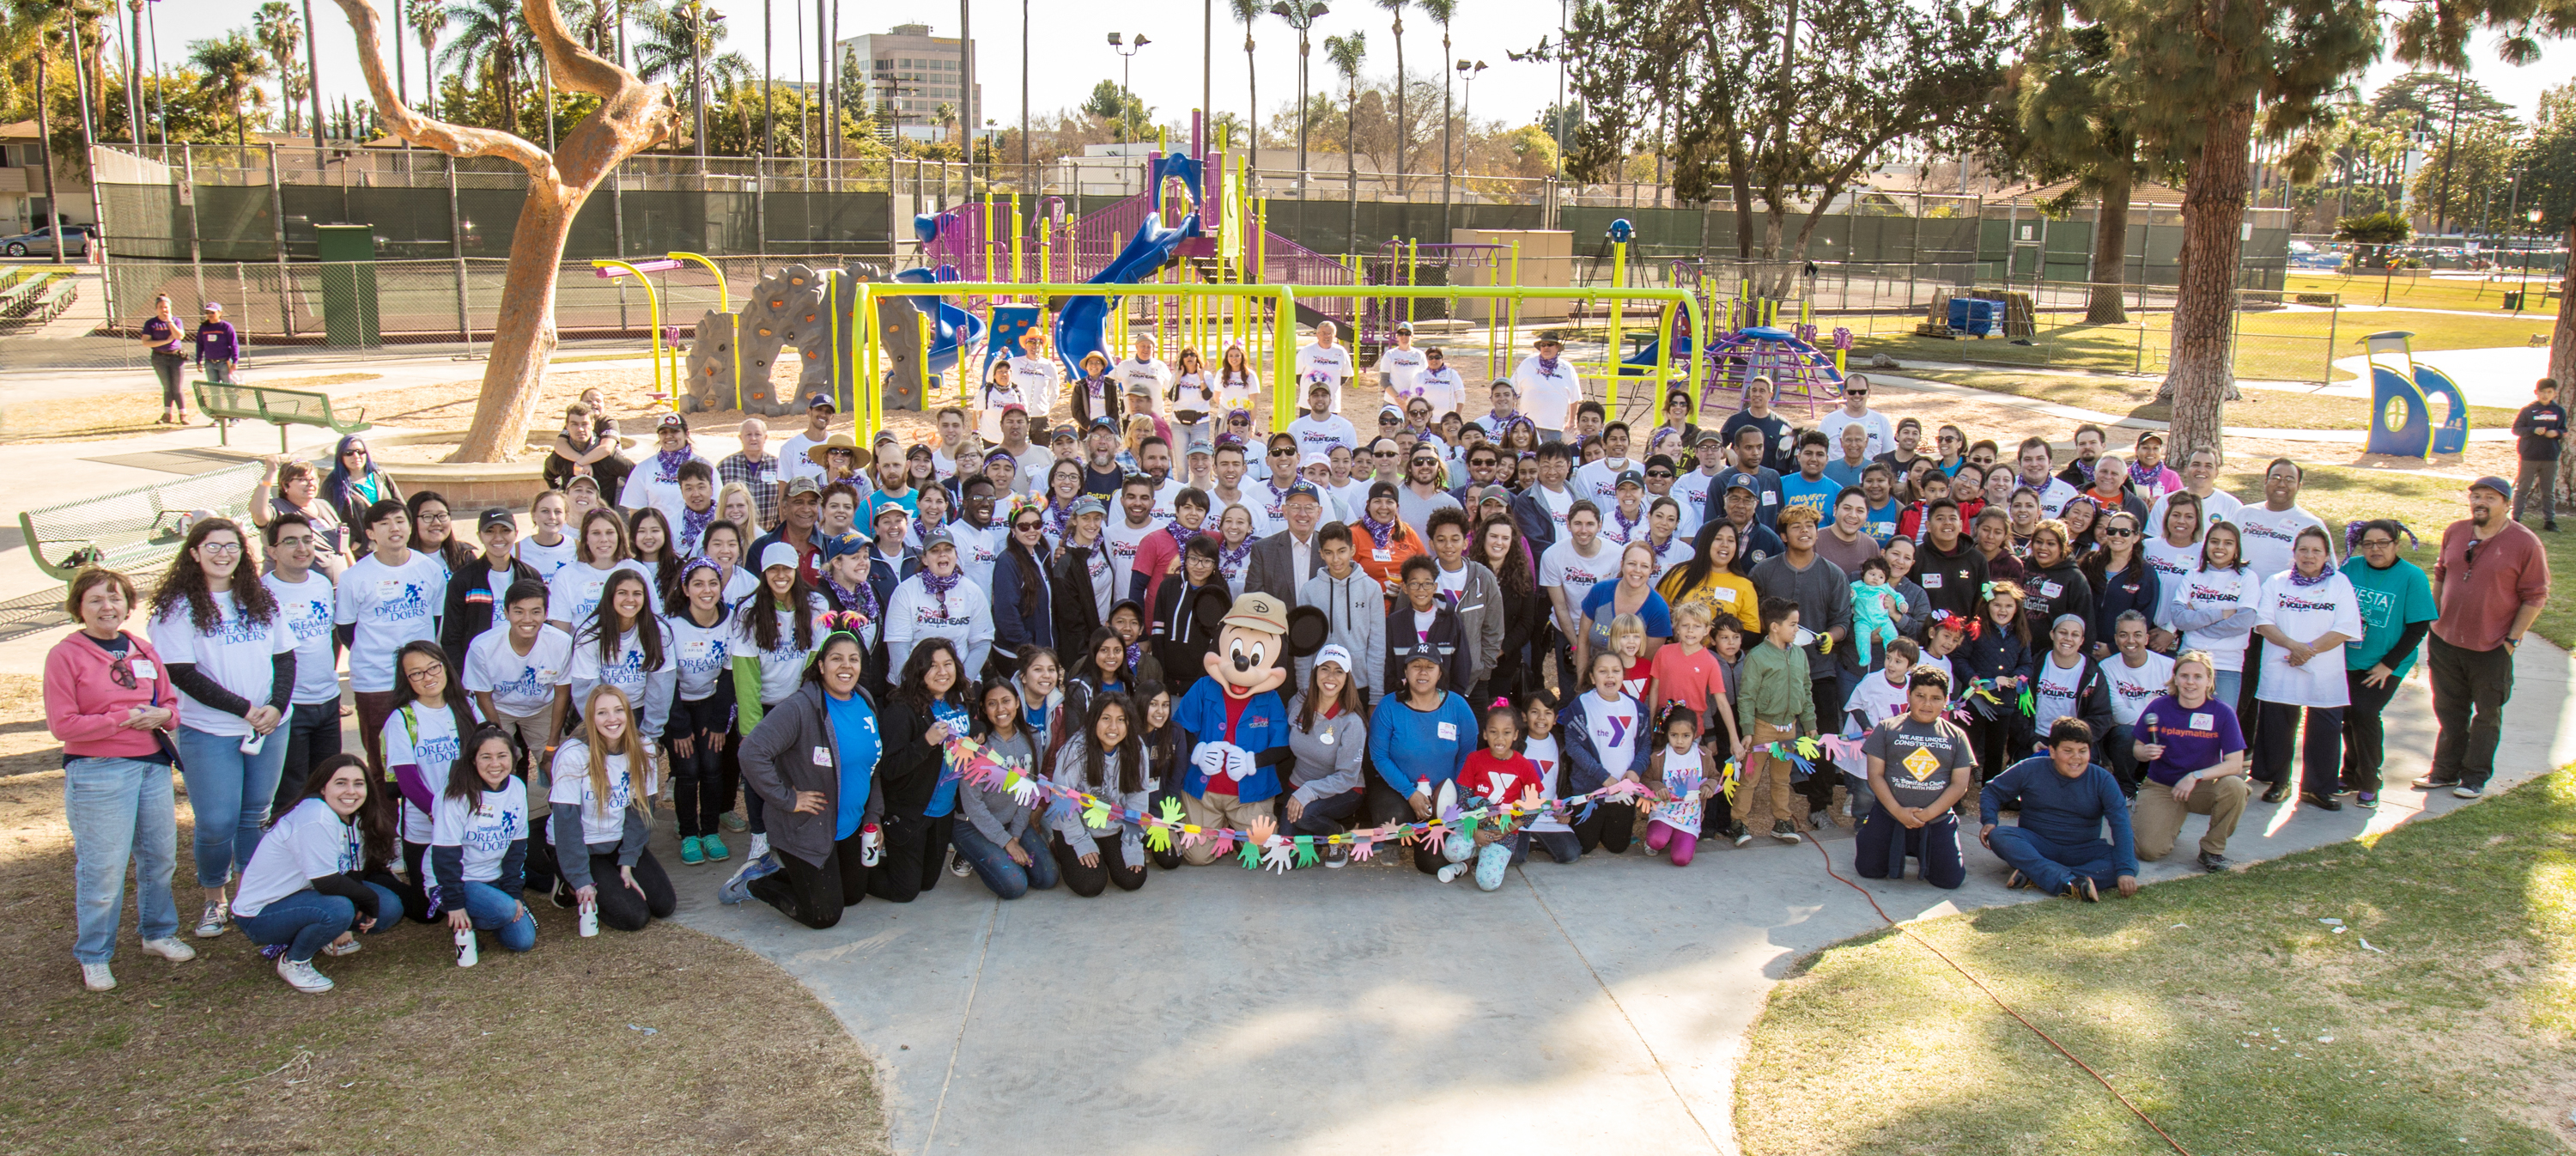 City of Anaheim, Anaheim Family YMCA, Disney and KaBOOM! Partner to Increase Play Opportunities for Anaheim Kids